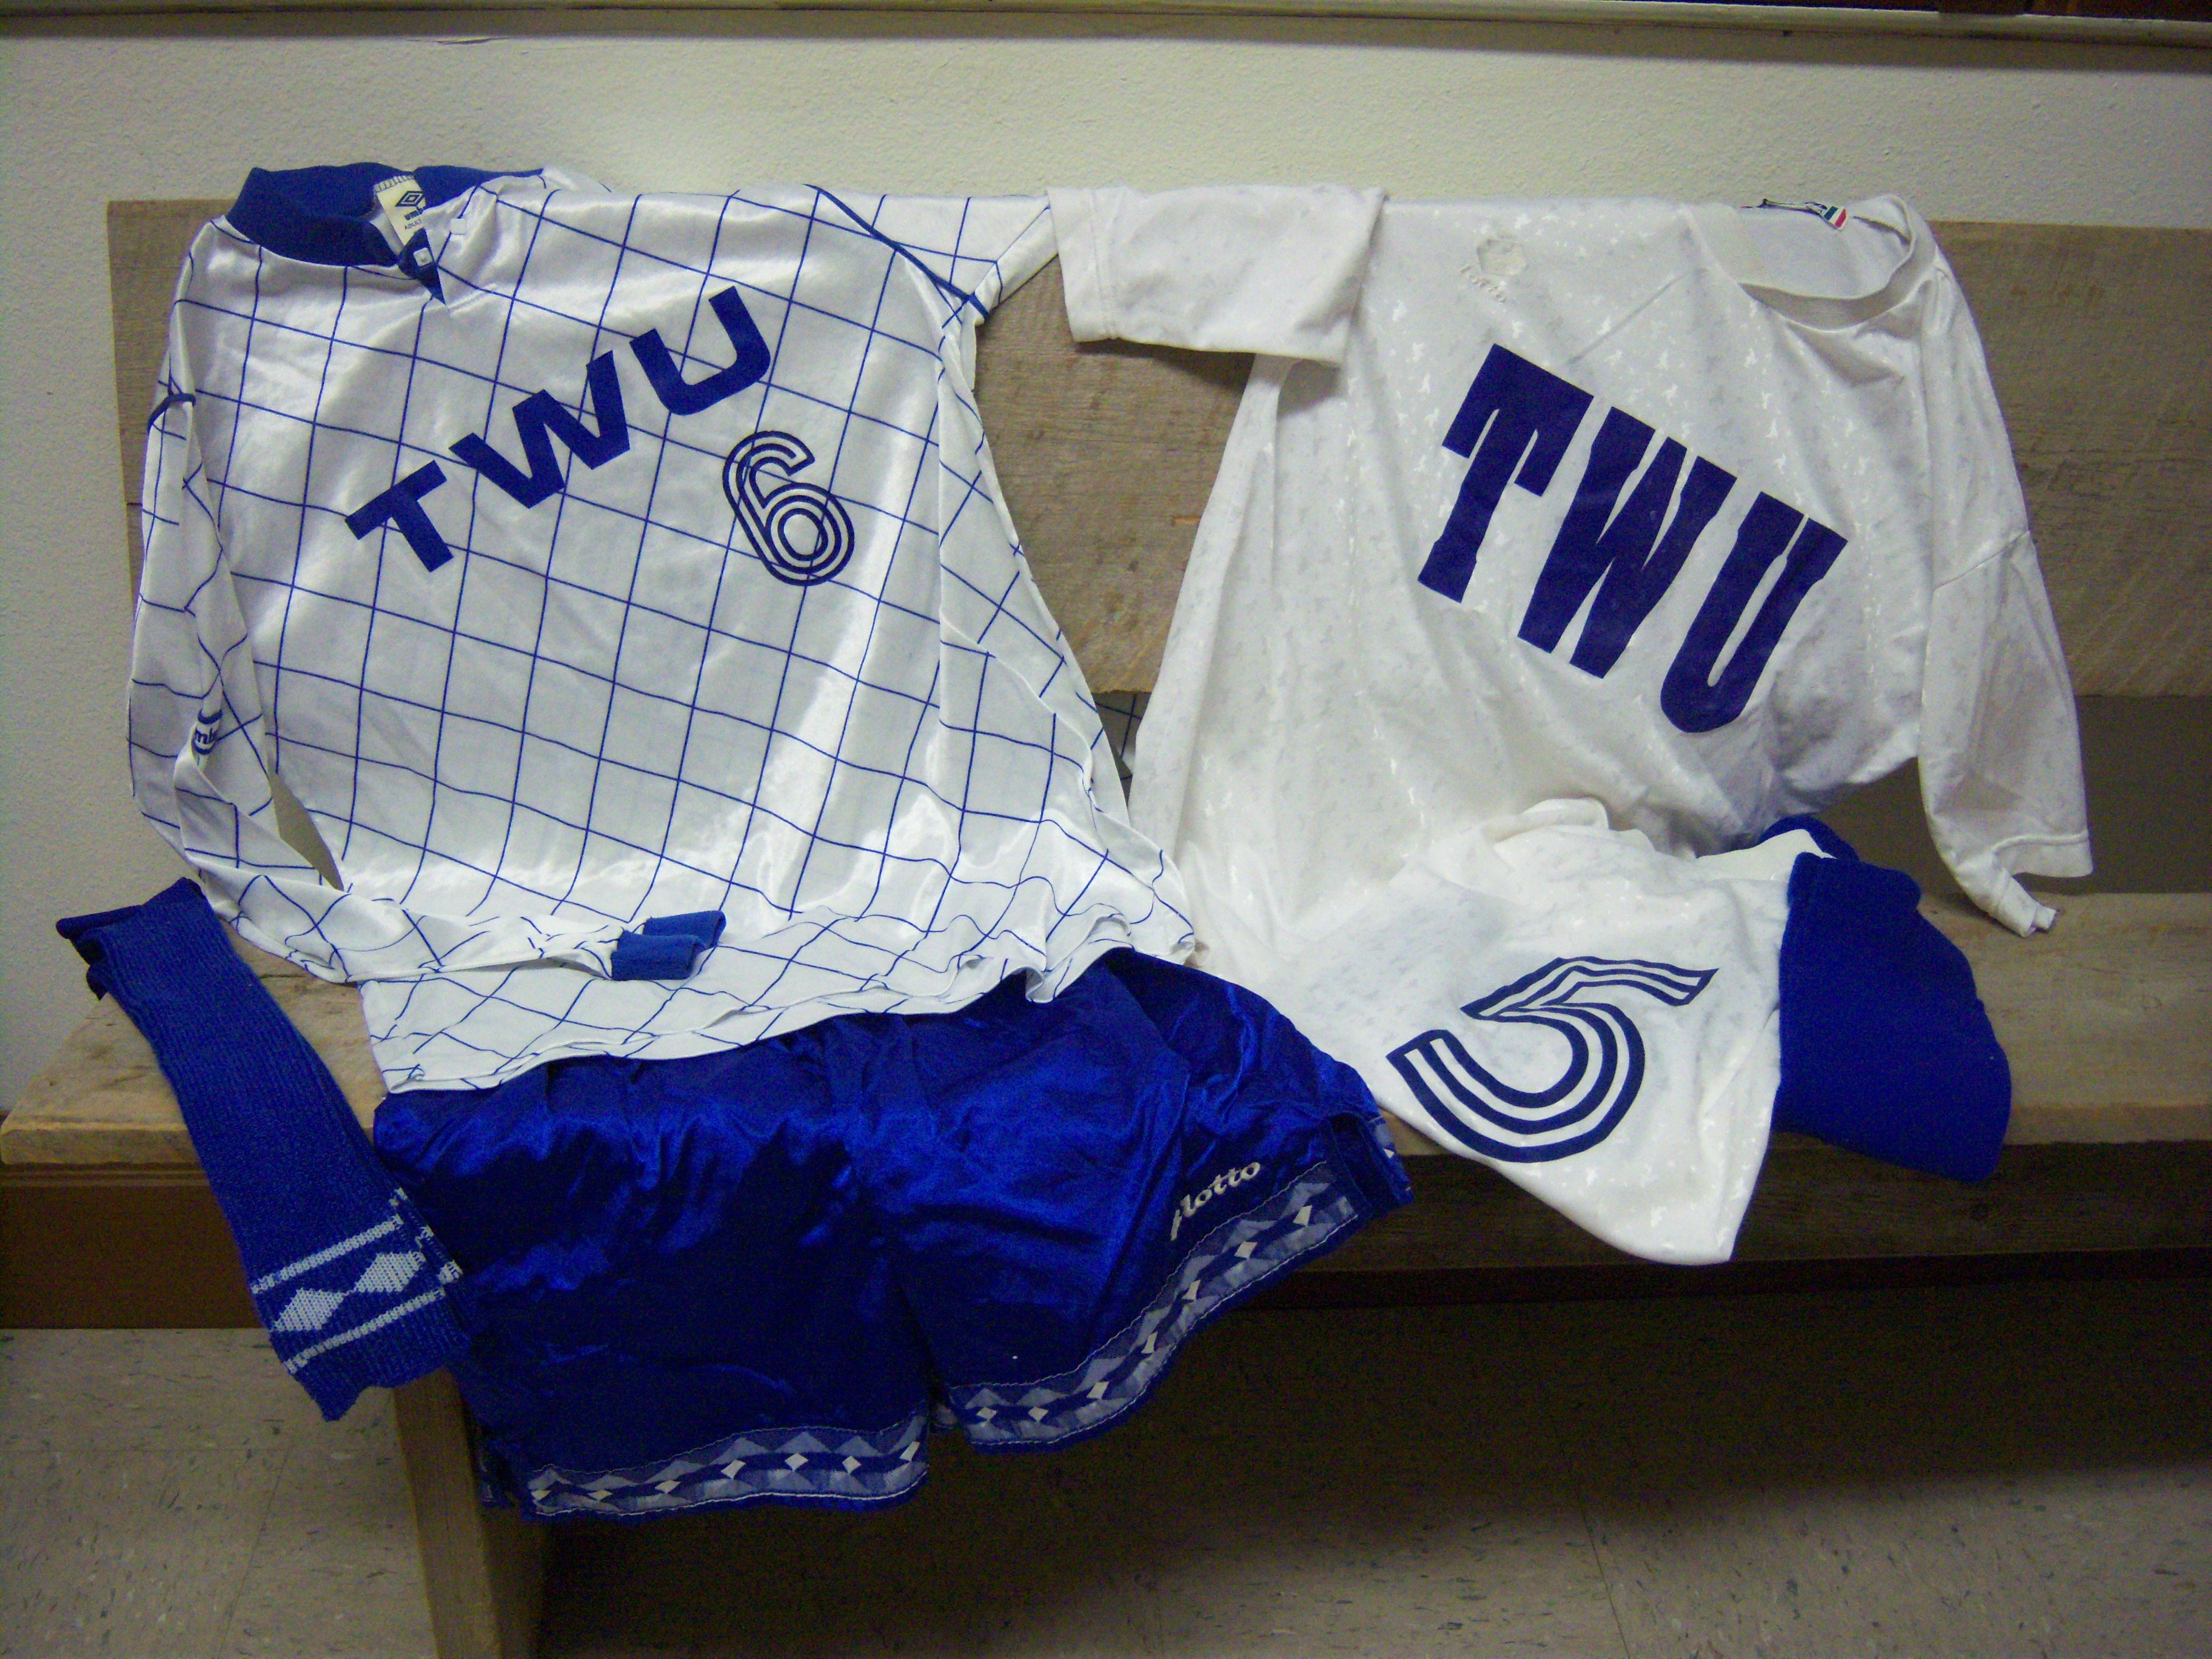 White and Blue Soccer Uniforms